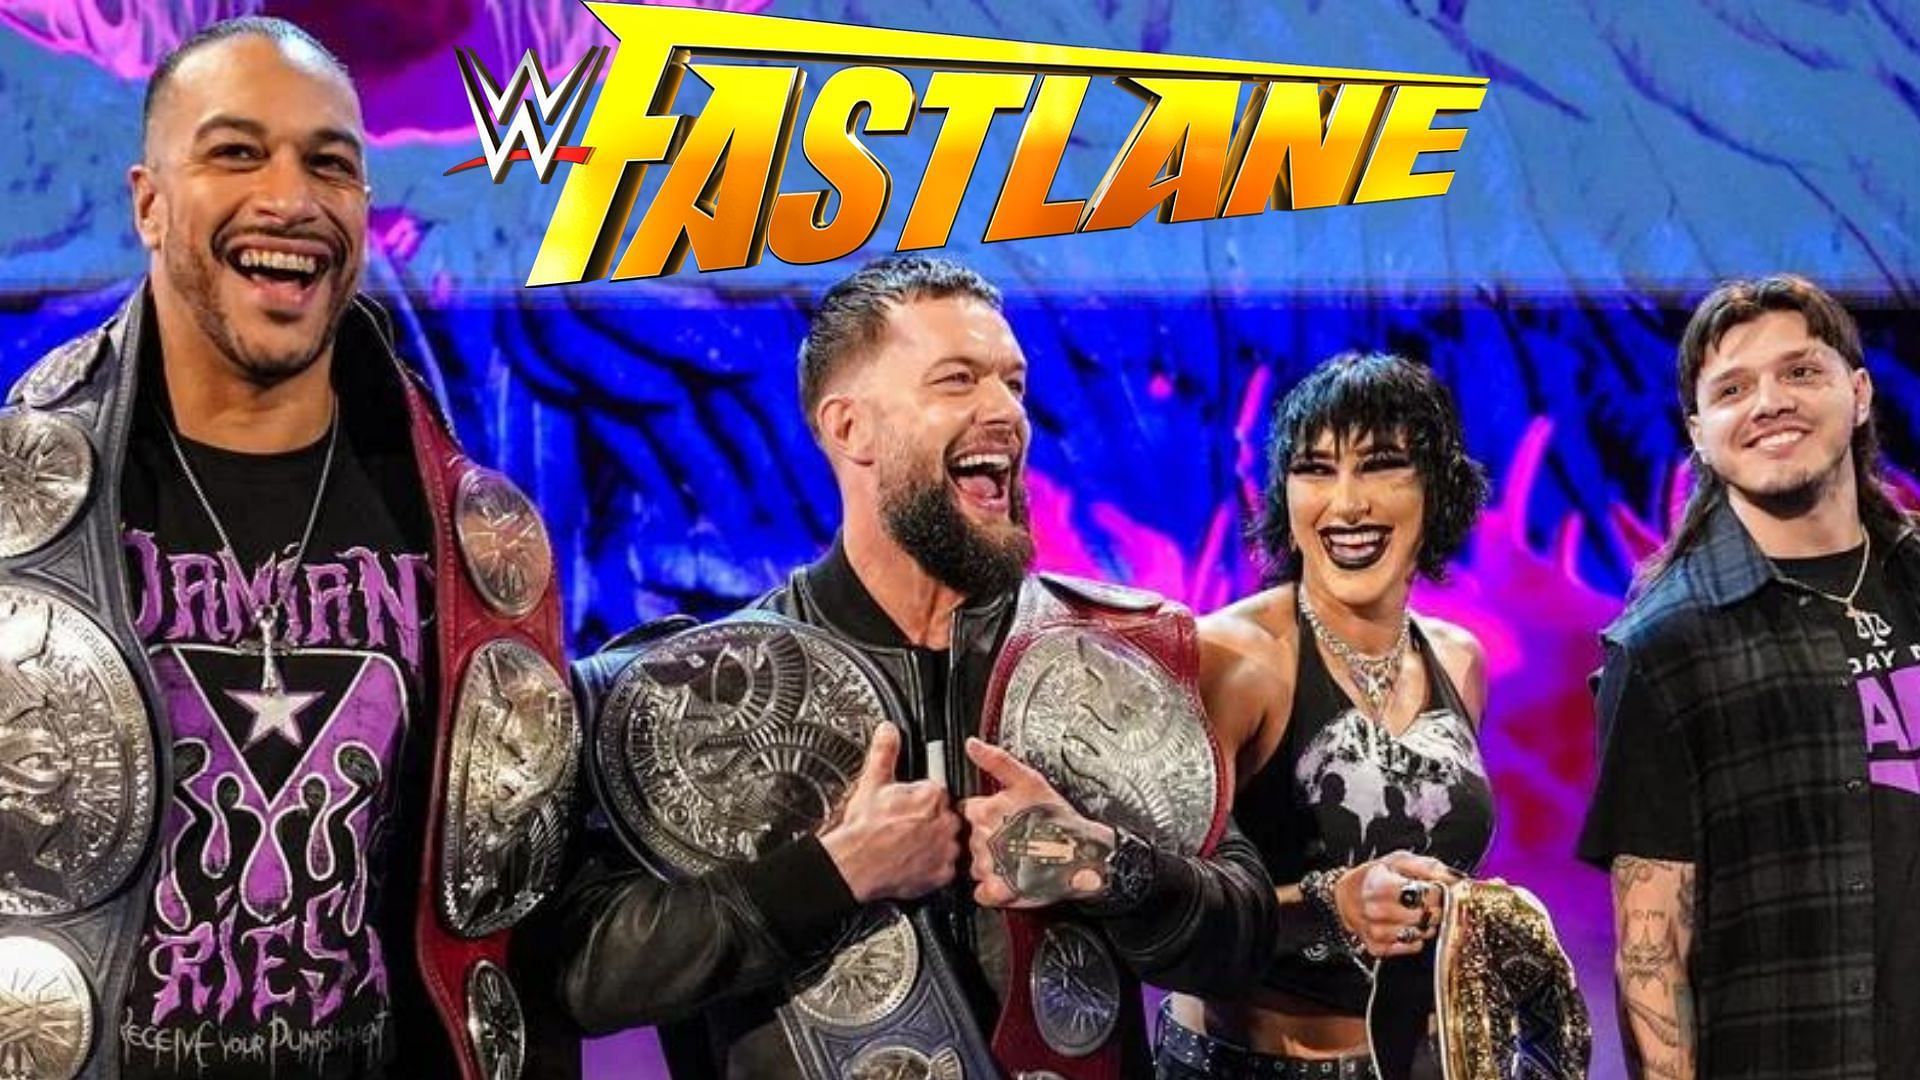 The Judgment Day will be in action at Fastlane.